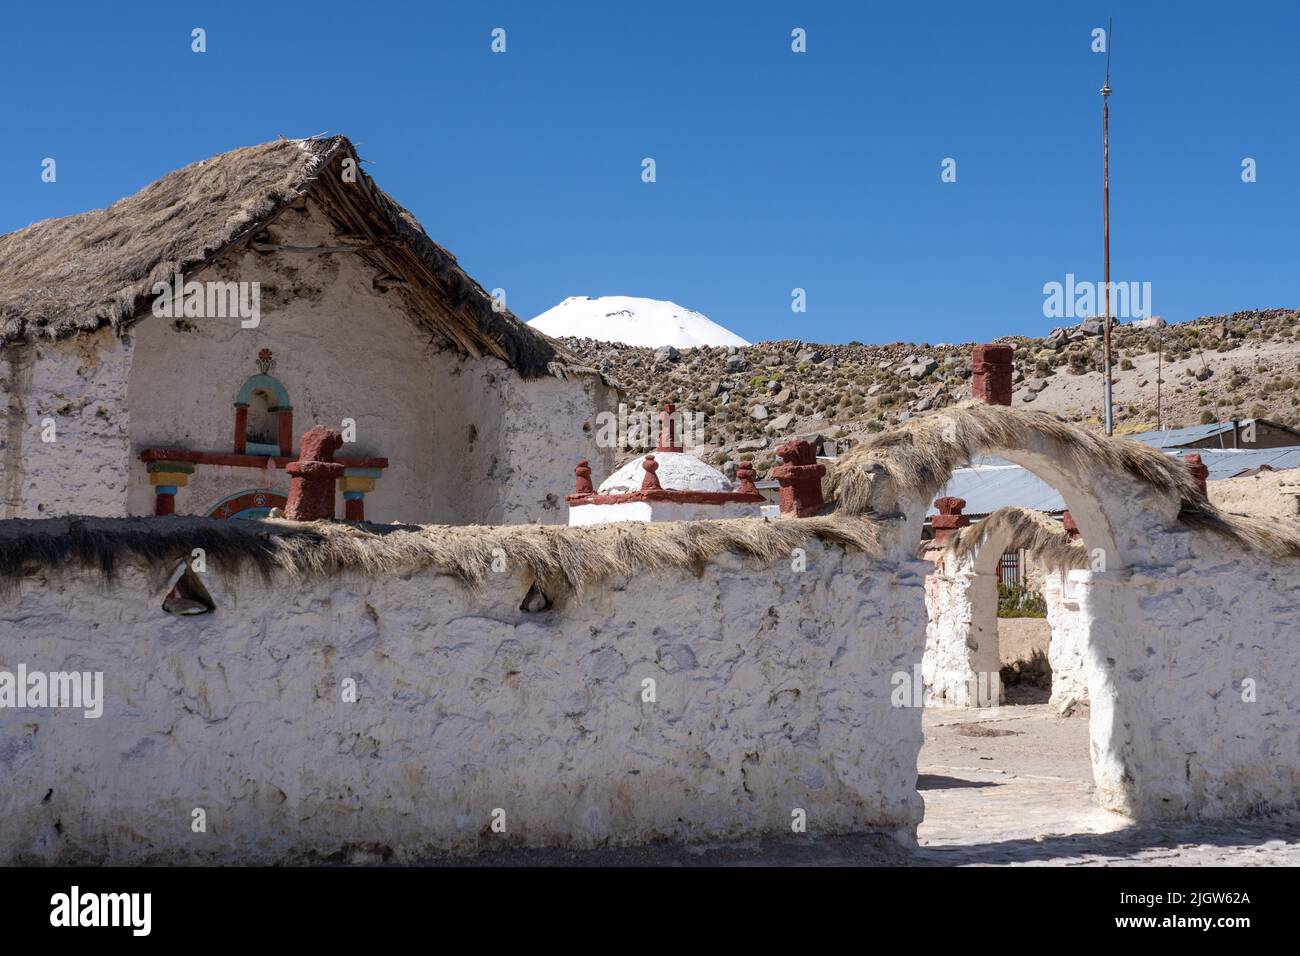 An arched entryway into the grounds of the Church of the VIrgin of the Nativity in the village of Parinacota in Chile.  Behind is the snow-capped peak Stock Photo